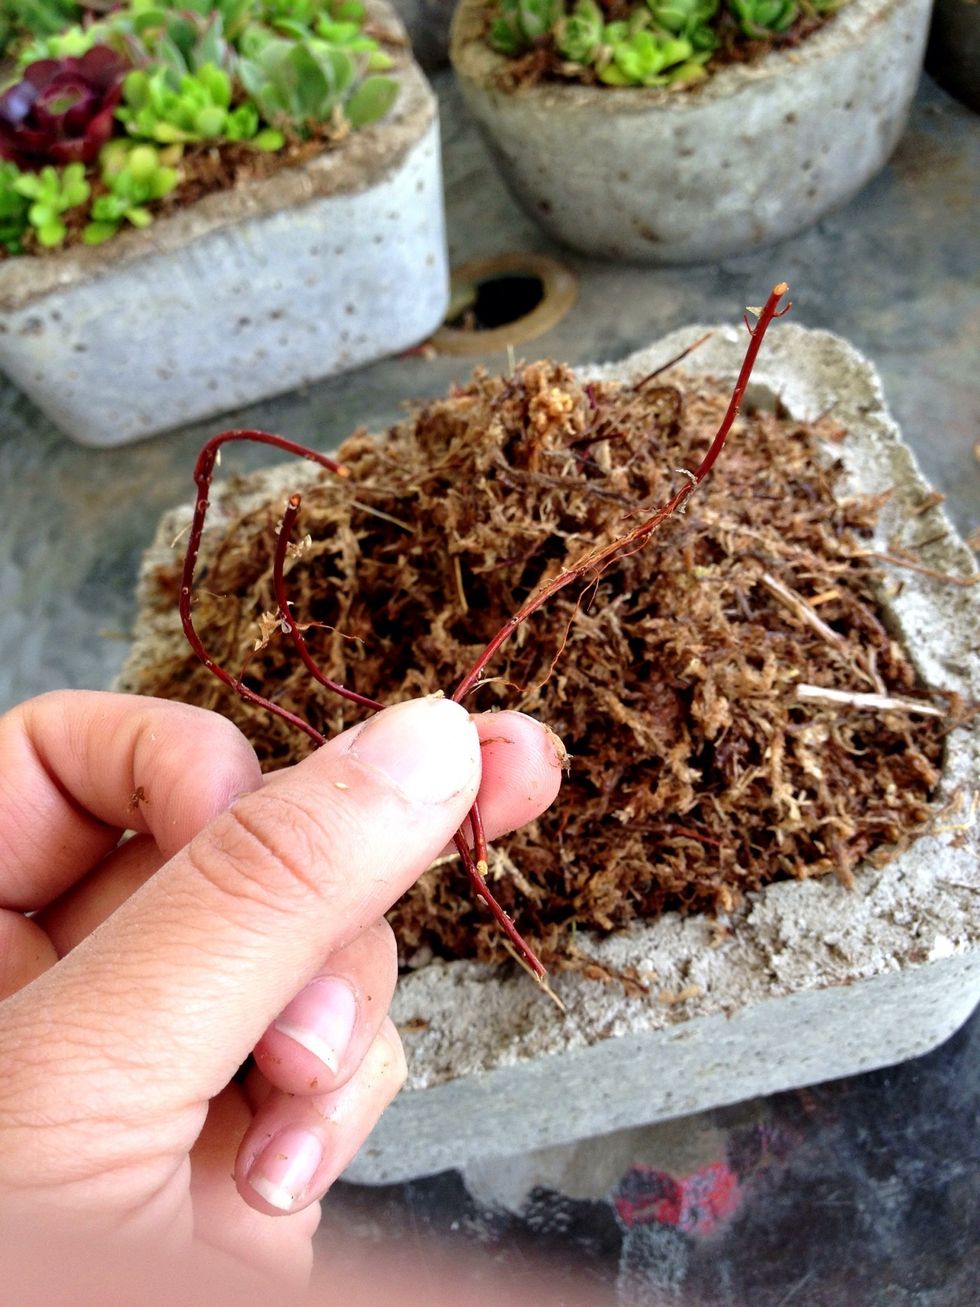 Remove any hard stems from the moss.